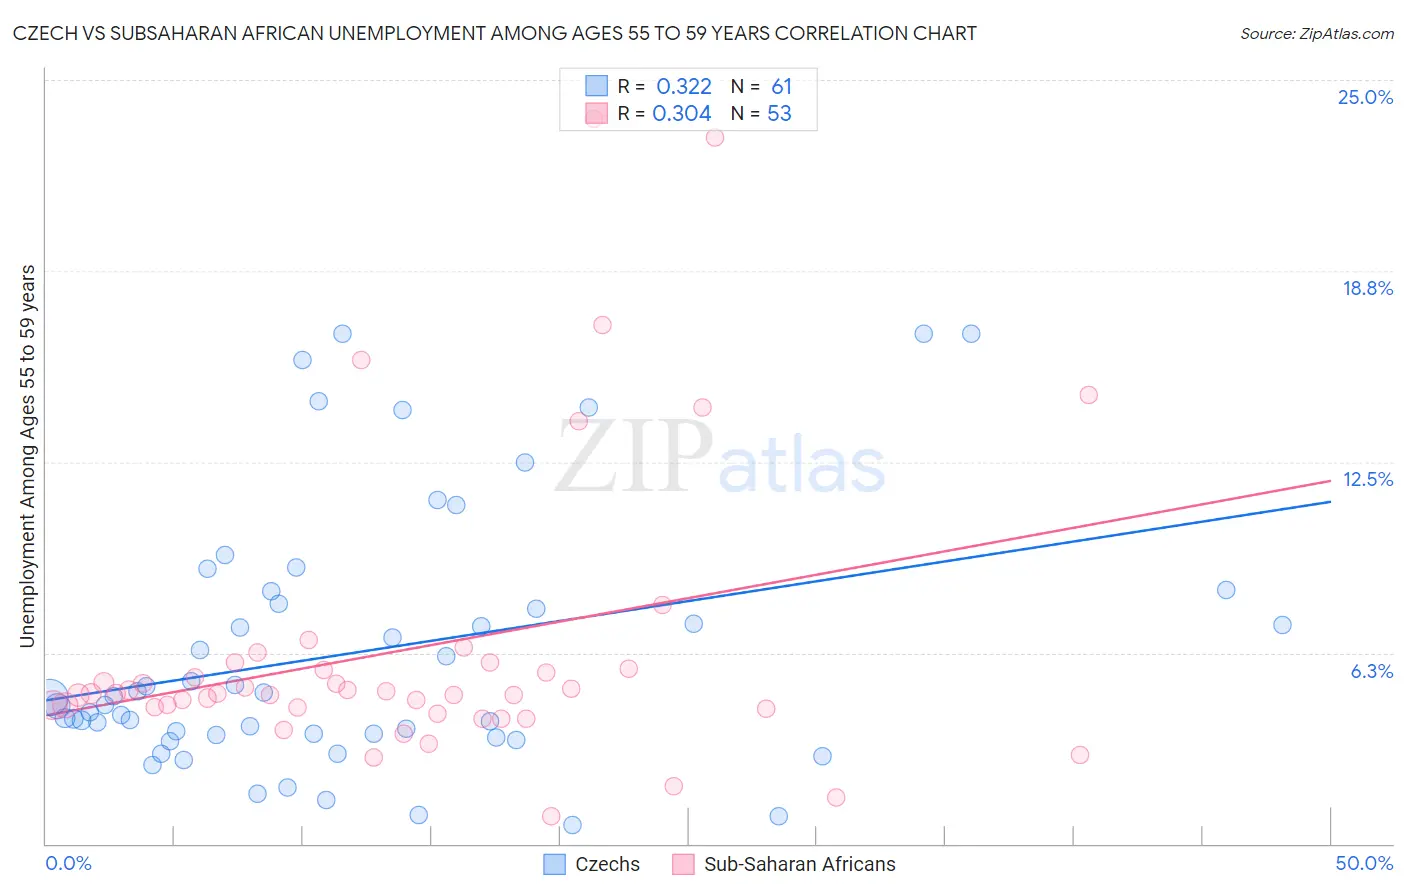 Czech vs Subsaharan African Unemployment Among Ages 55 to 59 years